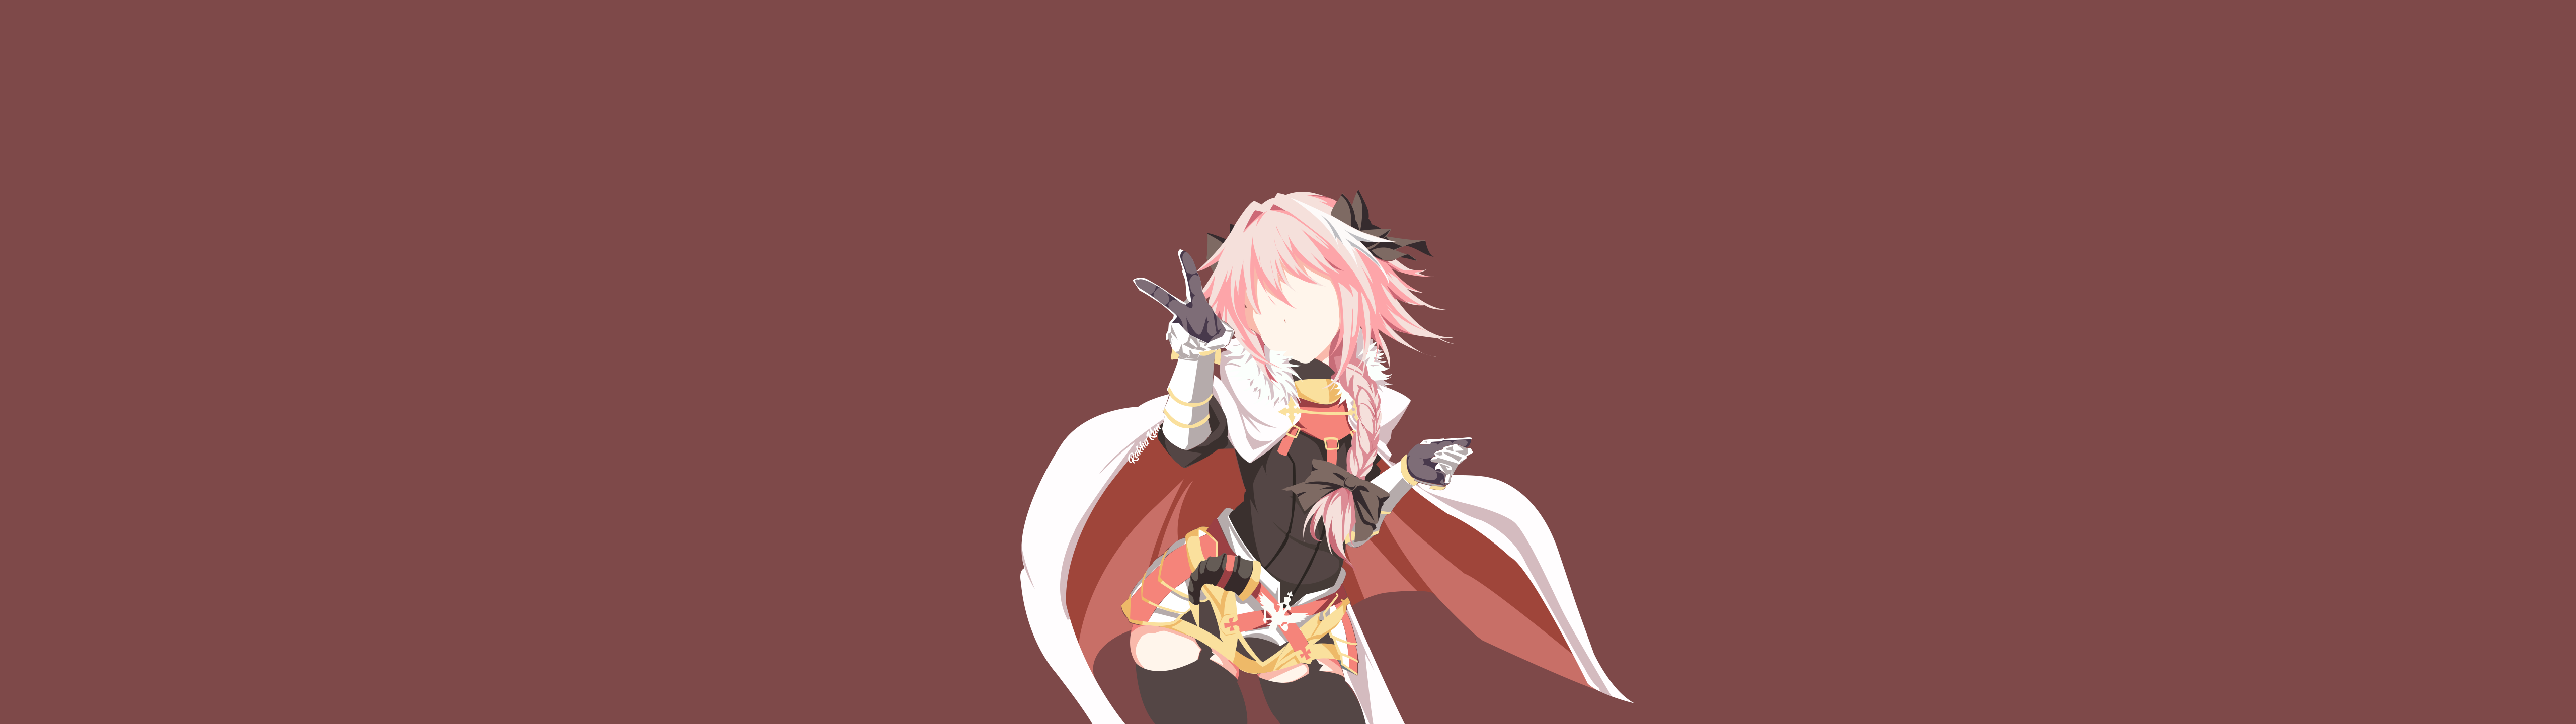 Anime 5120x1440 anime boys wide screen ultrawide femboy Astolfo (Fate/Apocrypha) Fate series faceless simple background minimalism peace sign cape braids long hair